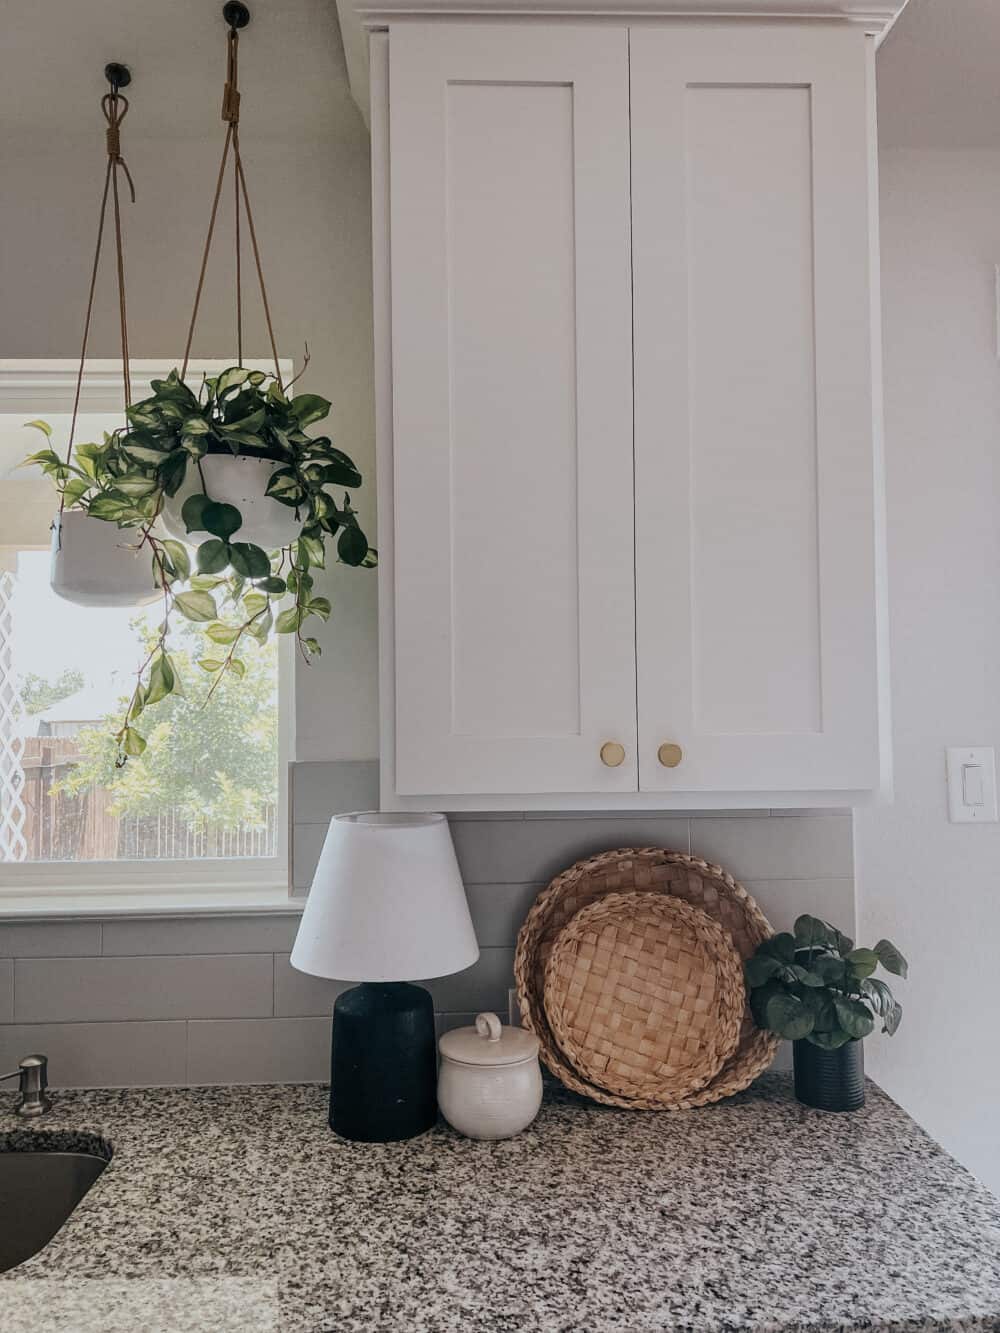 Kitchen cabinet with plants hanging from the ceiling next to it 